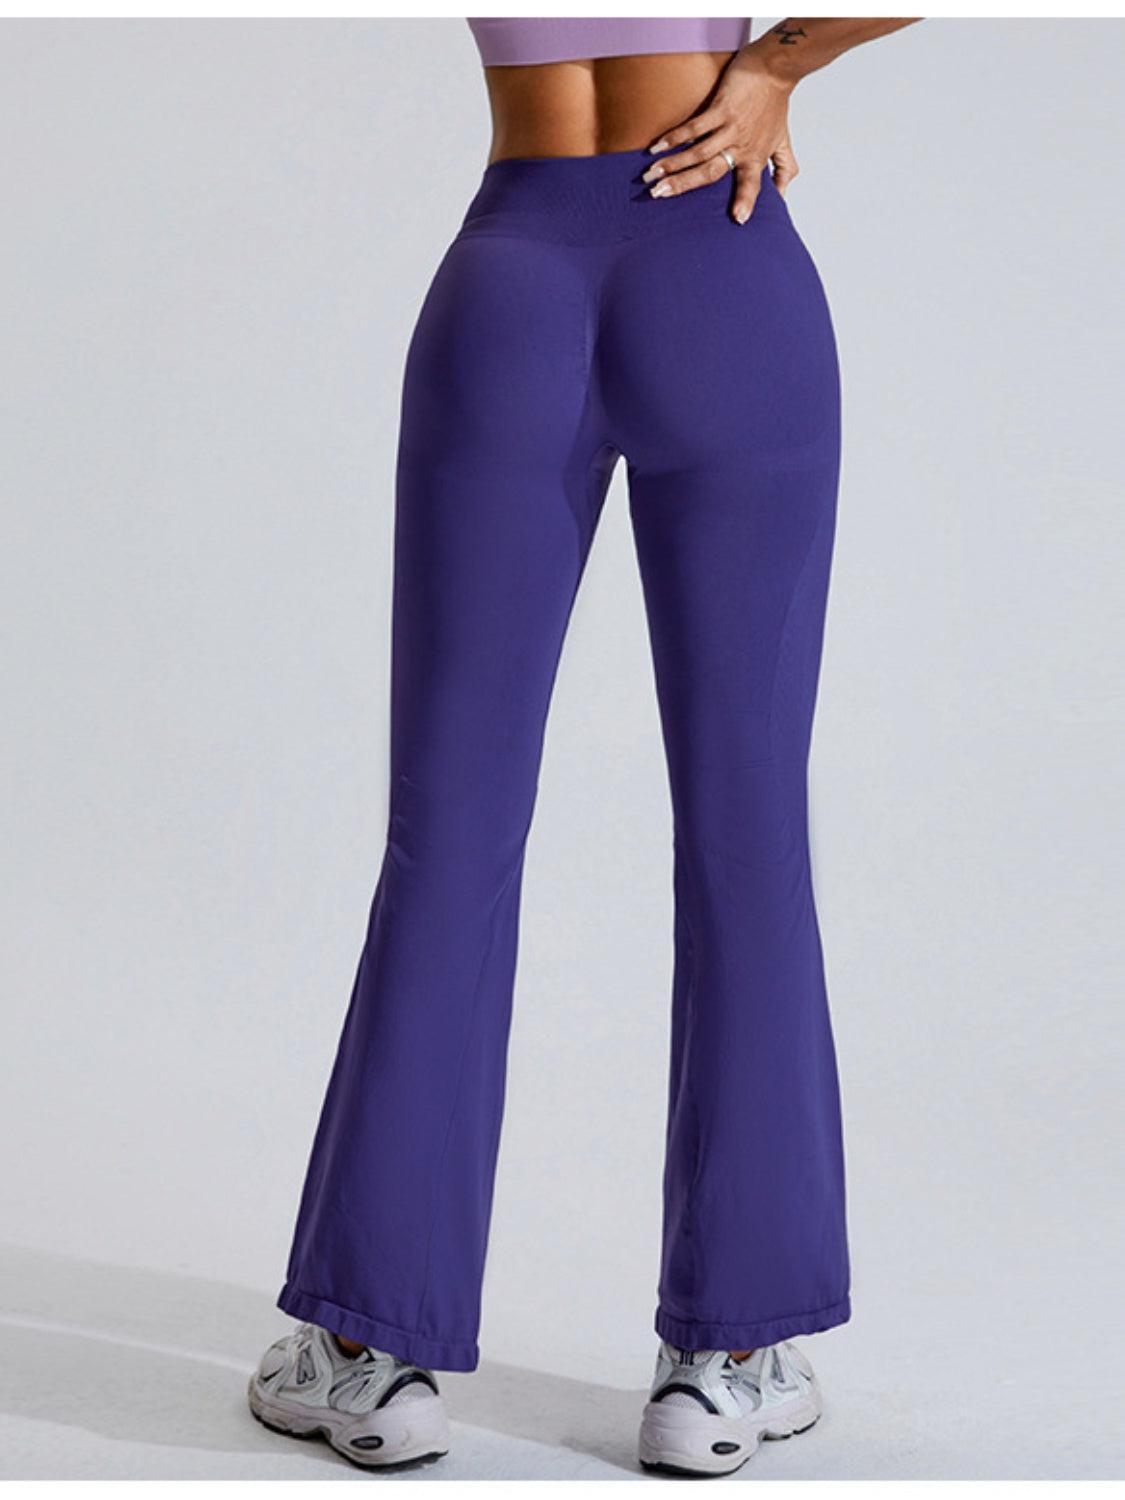 a woman in purple pants is posing for a picture